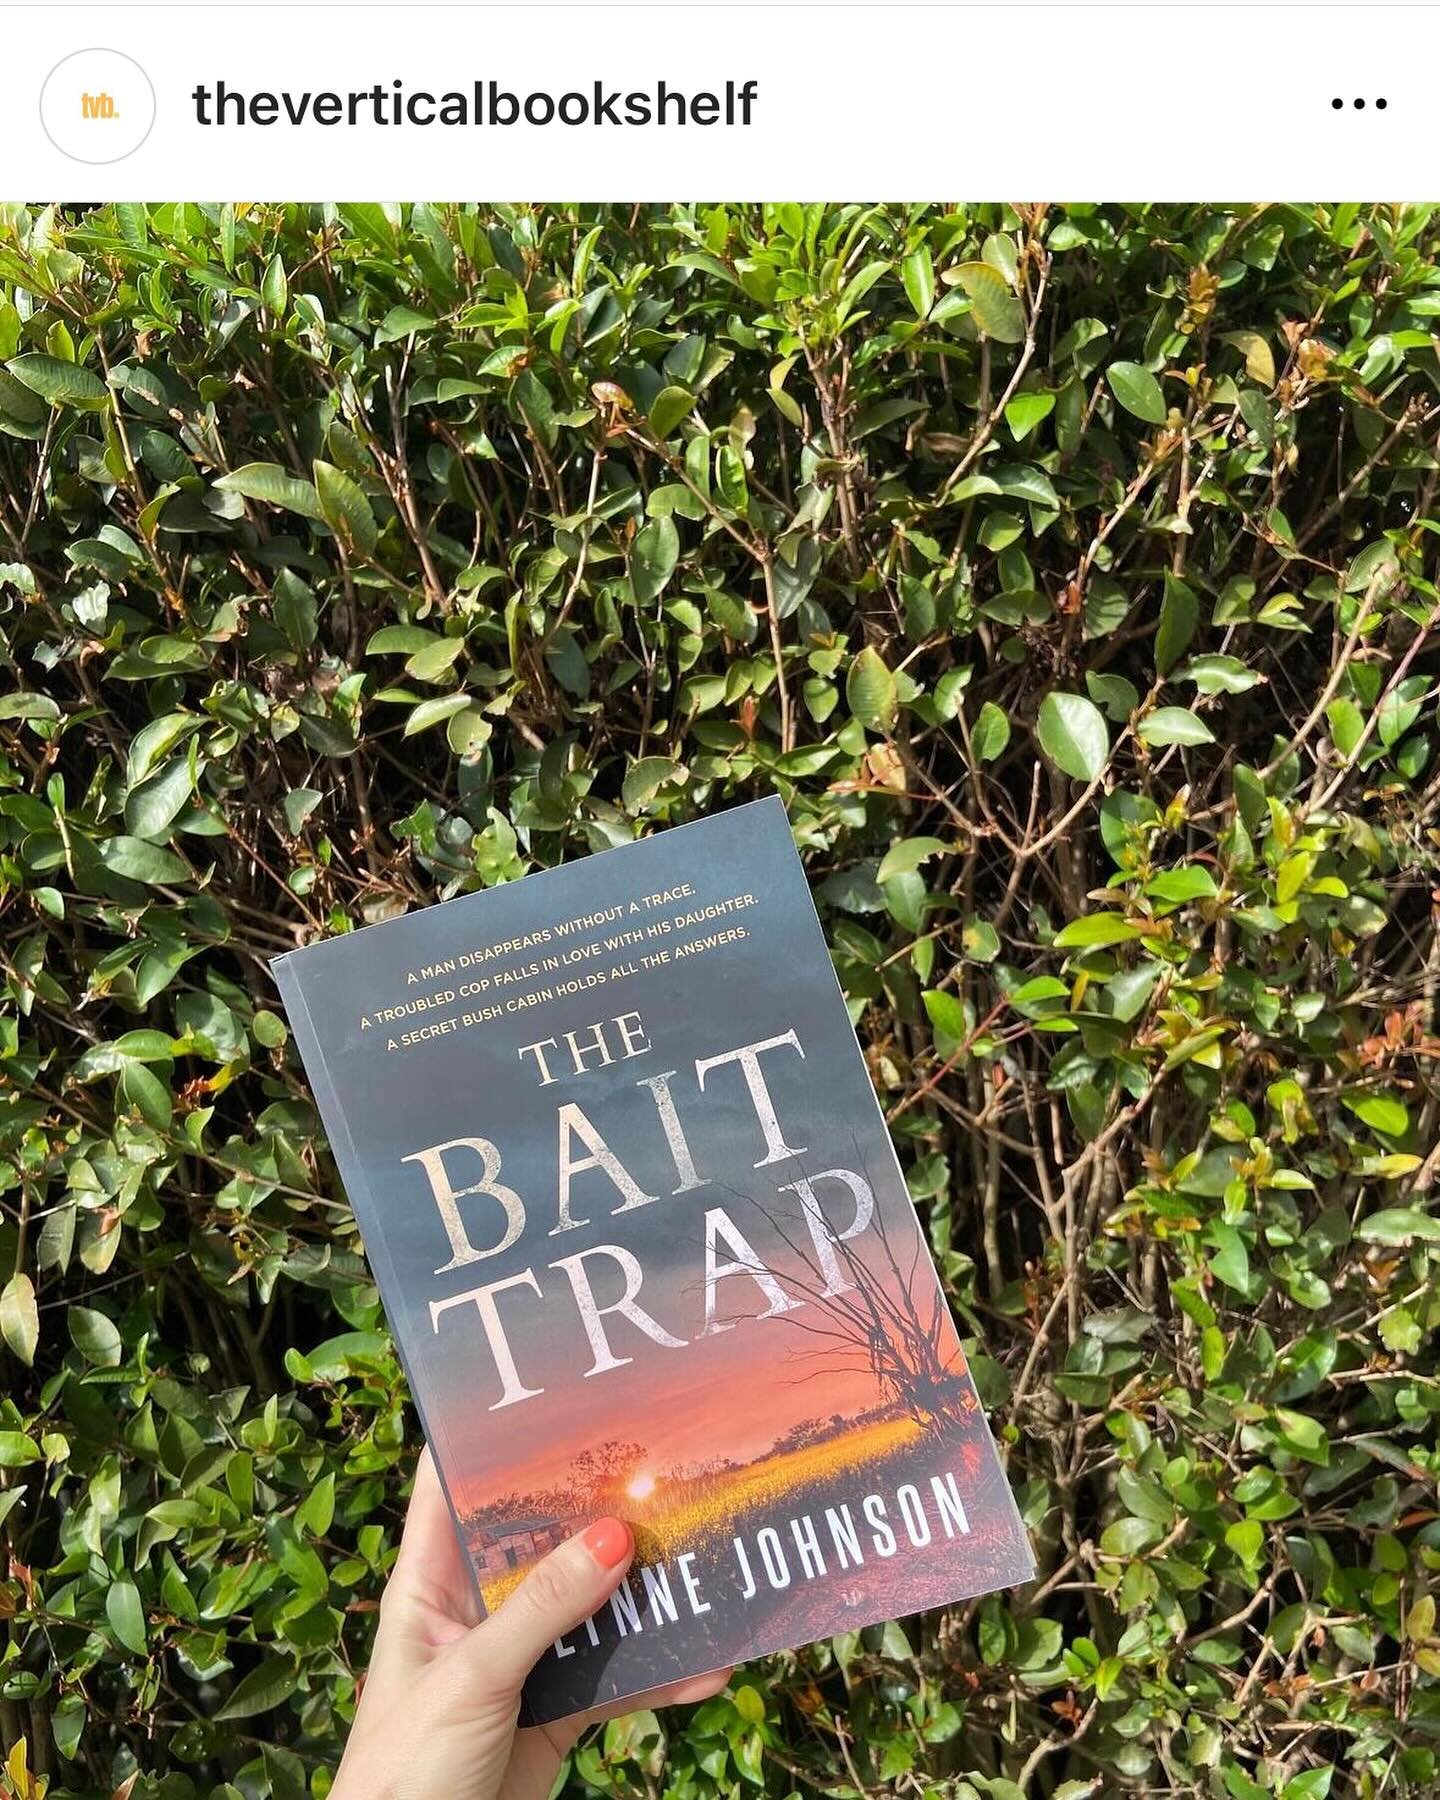 This review by @theverticalbookshelf really made my day. &lsquo;I love an outback thriller&hellip;battler storyline&hellip;lying neighbours&hellip;bullshit family secrets&hellip;Johnson has captured it all.&rsquo; 📚 
#thebaittrap #lynnejohnsonauthor